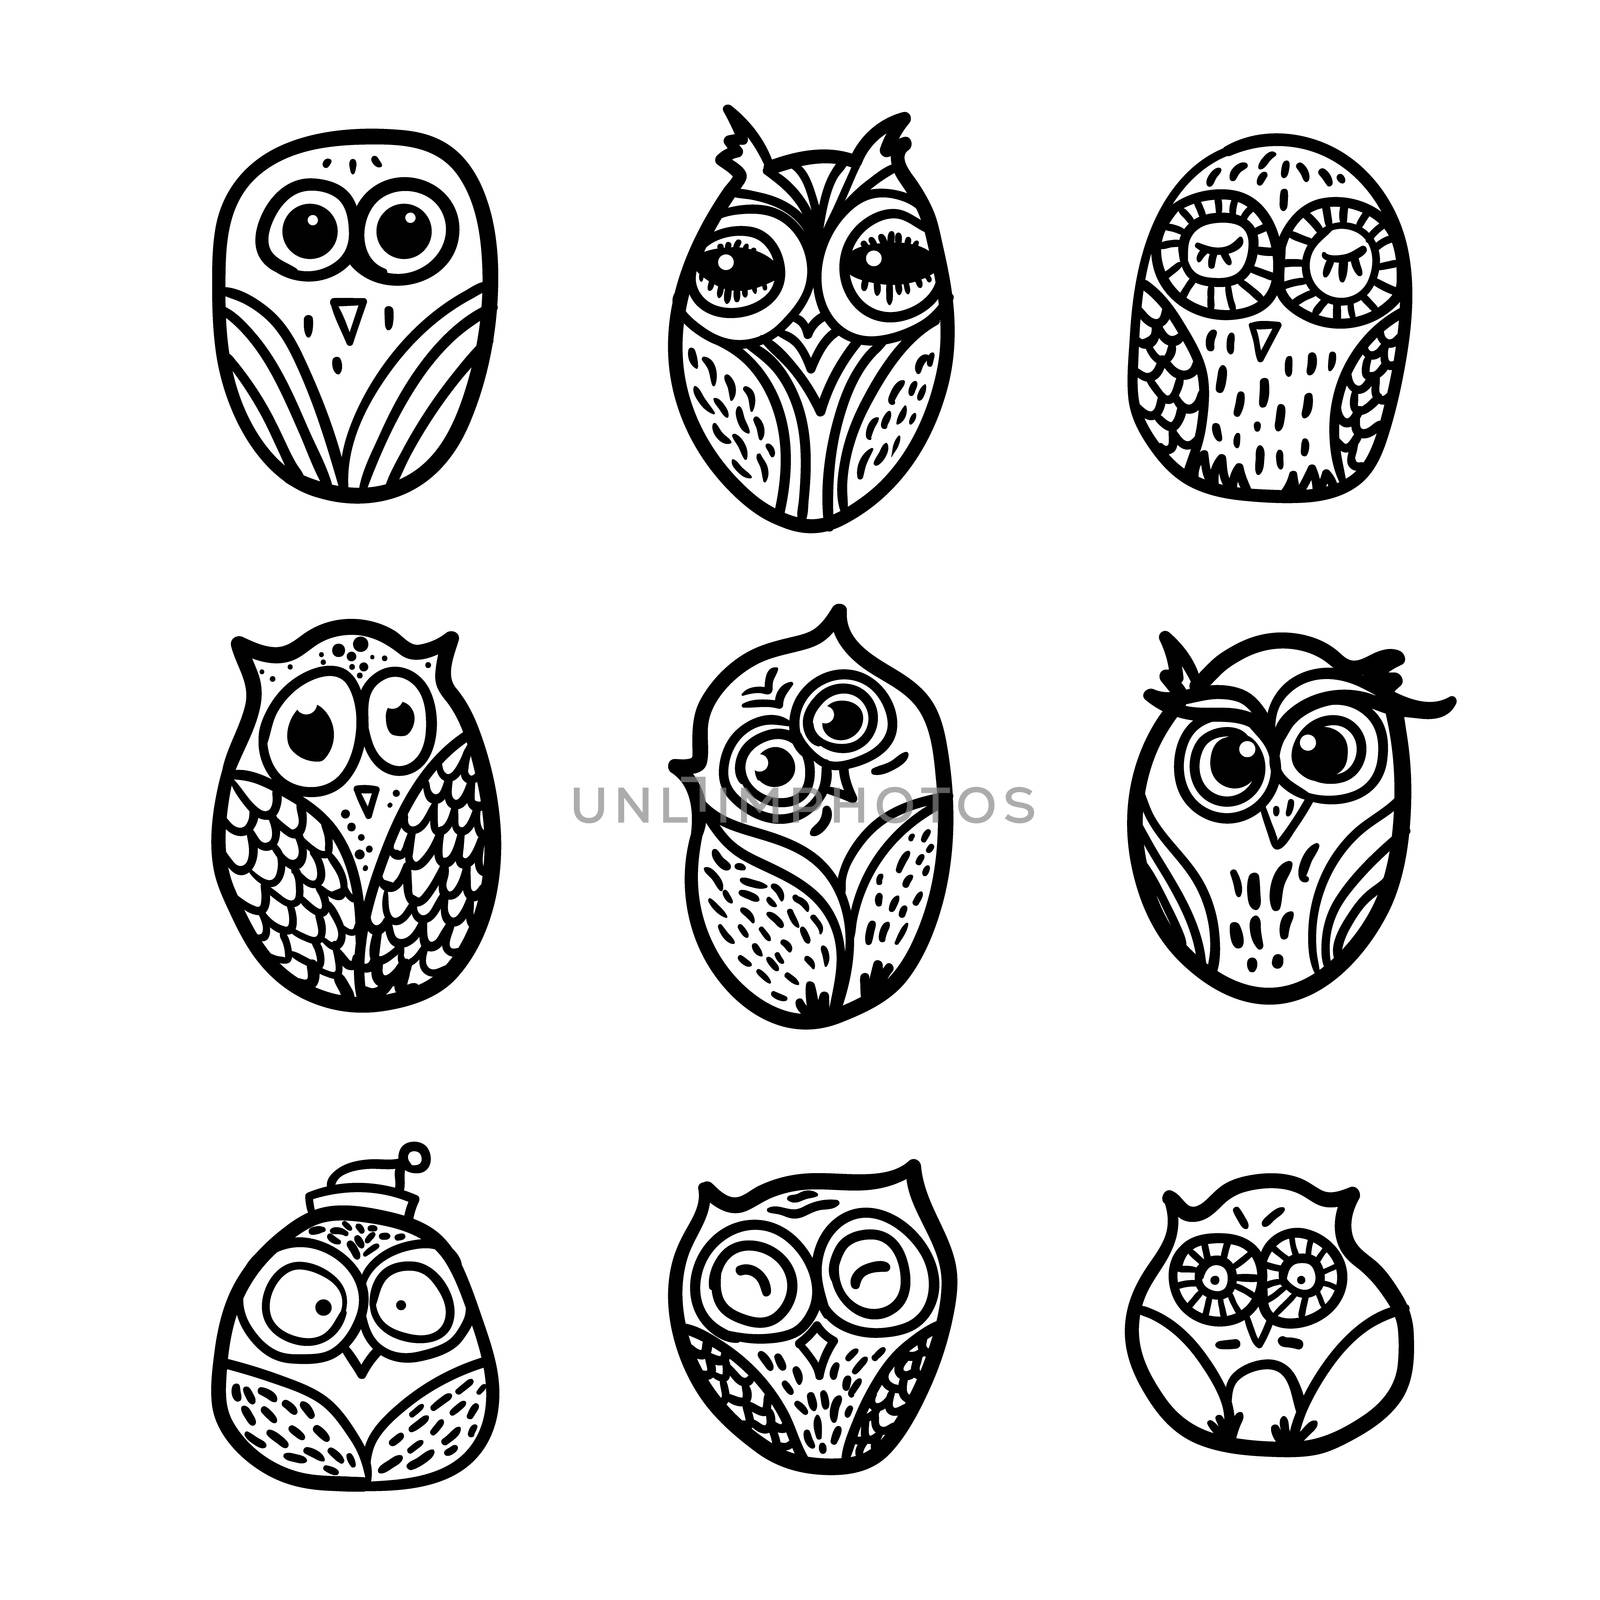 Hand Drawn Funny Owl. Owls set for print, fabric, wrap and illustration. Vector